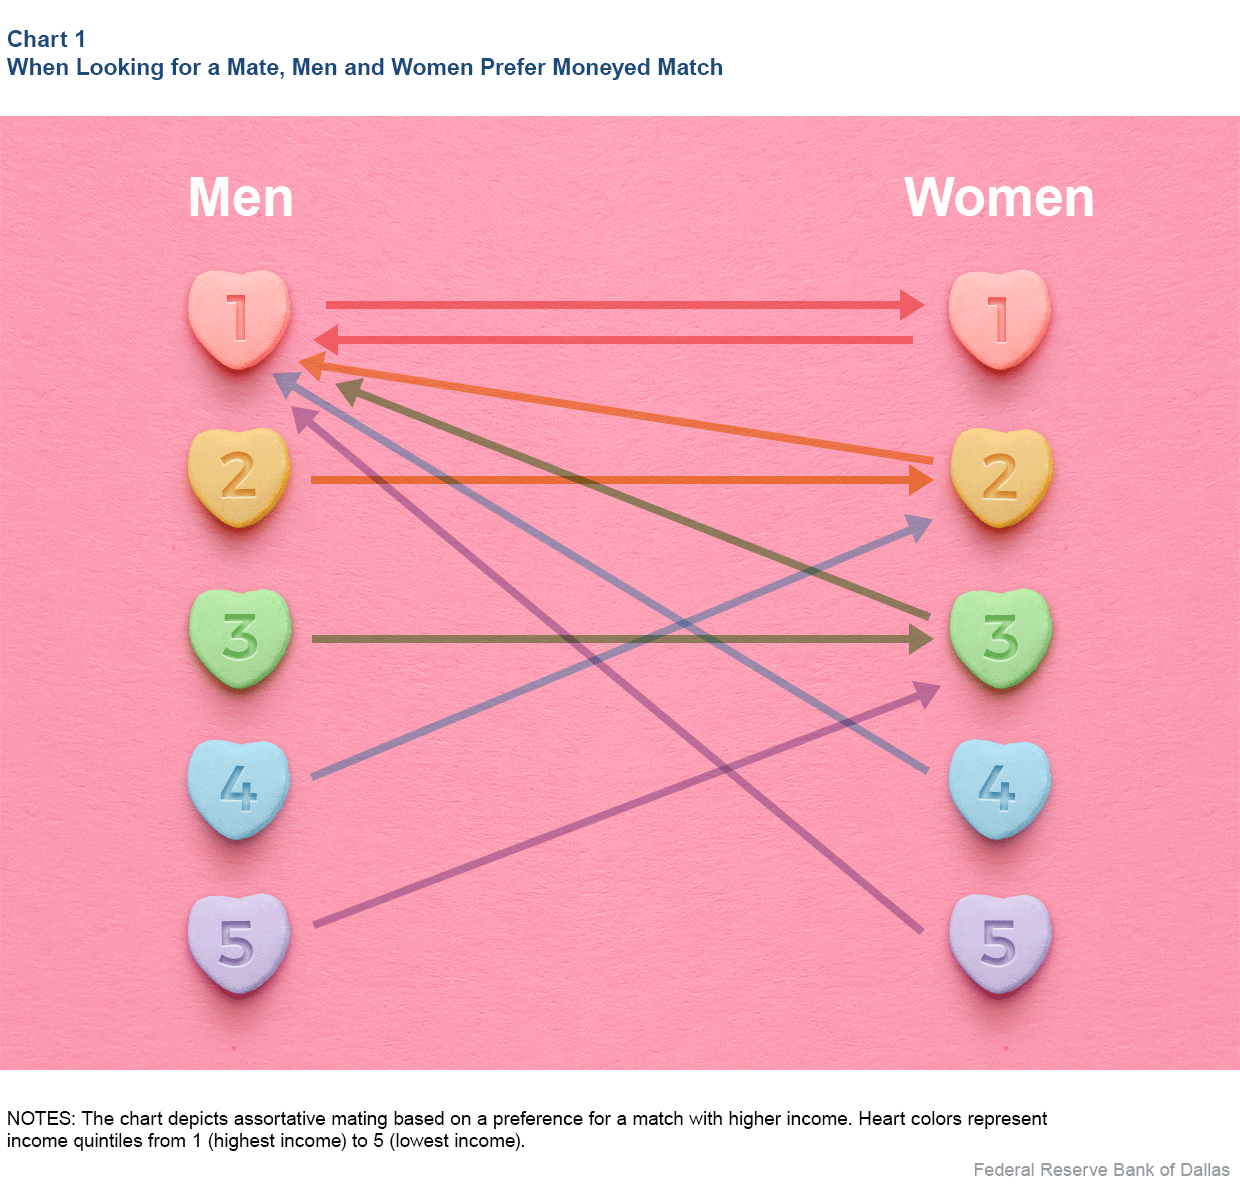 Chart 1: When Looking for a Mate, Men and Women Prefer Moneyed Match